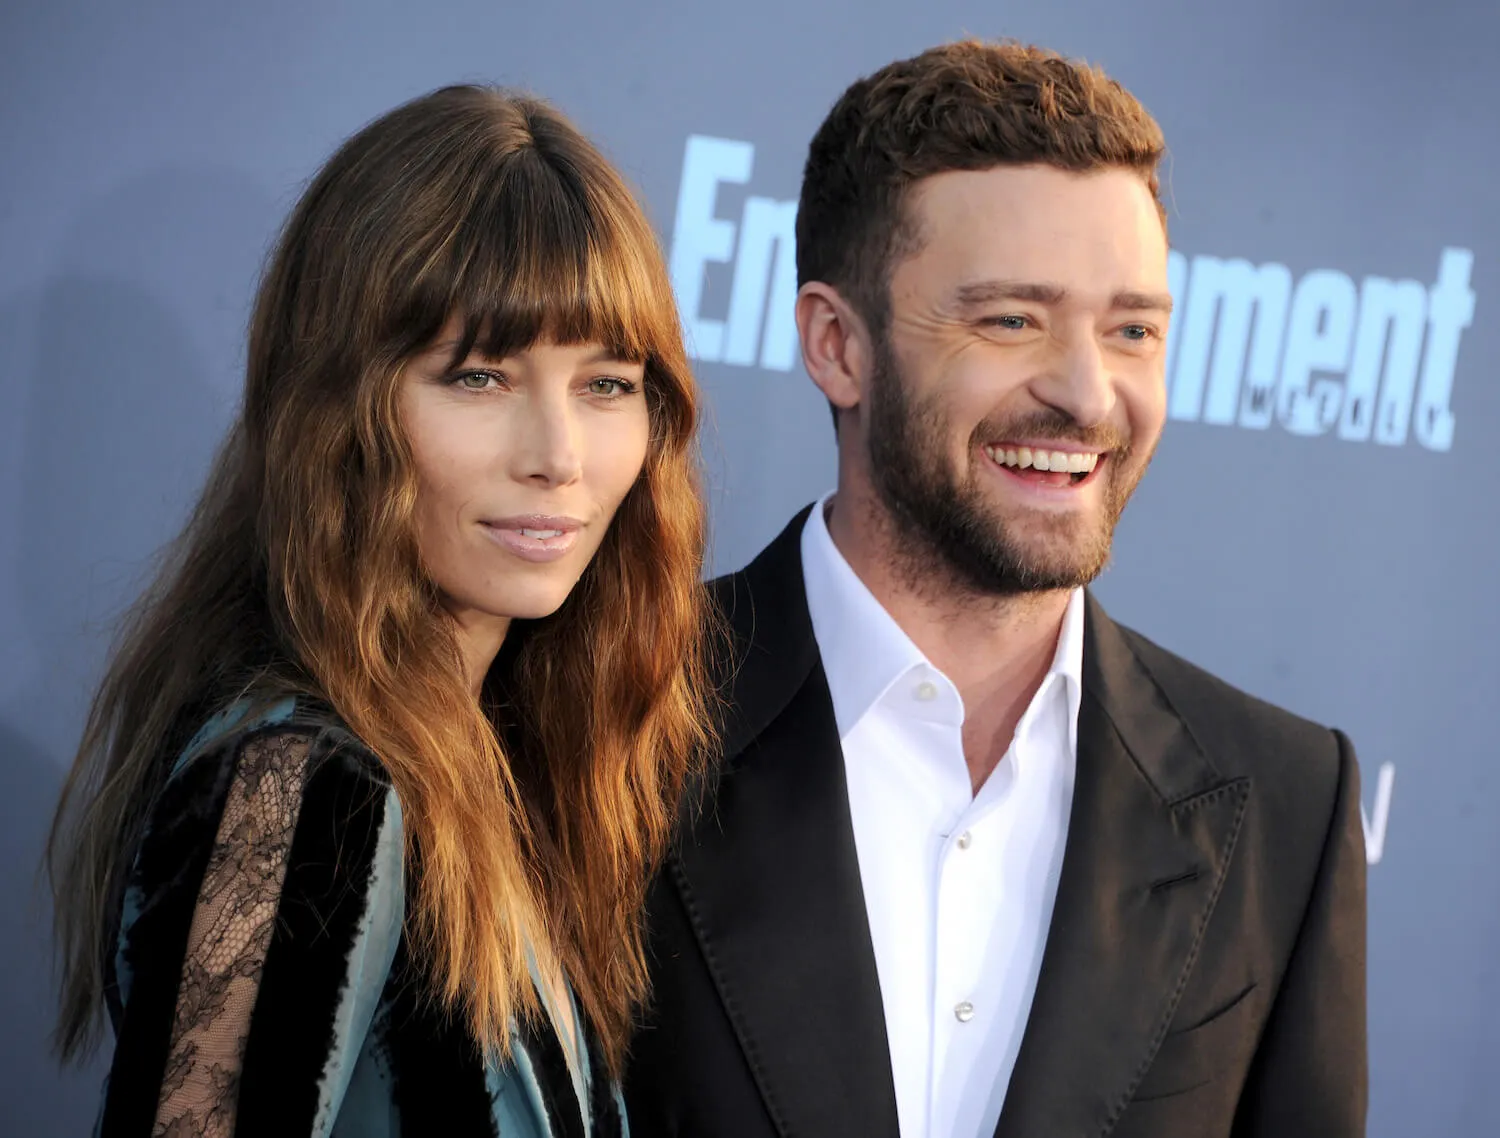 Jessica Biel and Justin Timberlake posing together at the 22nd Annual Critics' Choice Awards at Barker Hangar on Dec. 11, 2016